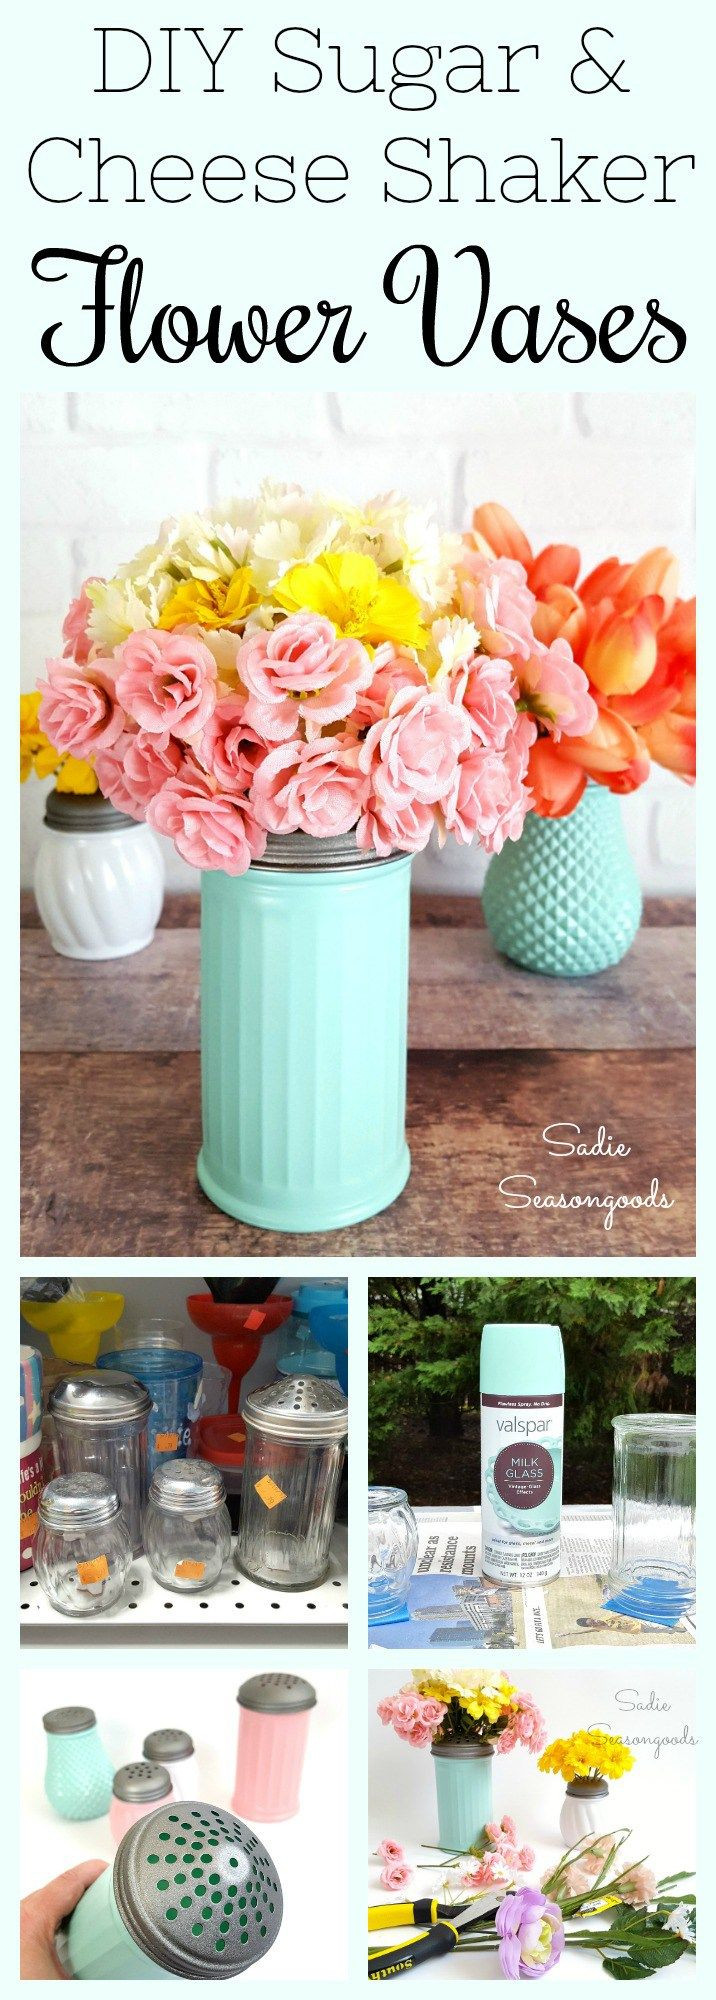 13 Stylish 9 Inch Cylinder Vases Dollar Tree 2024 free download 9 inch cylinder vases dollar tree of 172 best jar vase ideas events images on pinterest mason jars within diy flower frog vases with repurposed cheese and sugar shakers dollar storesthrift s